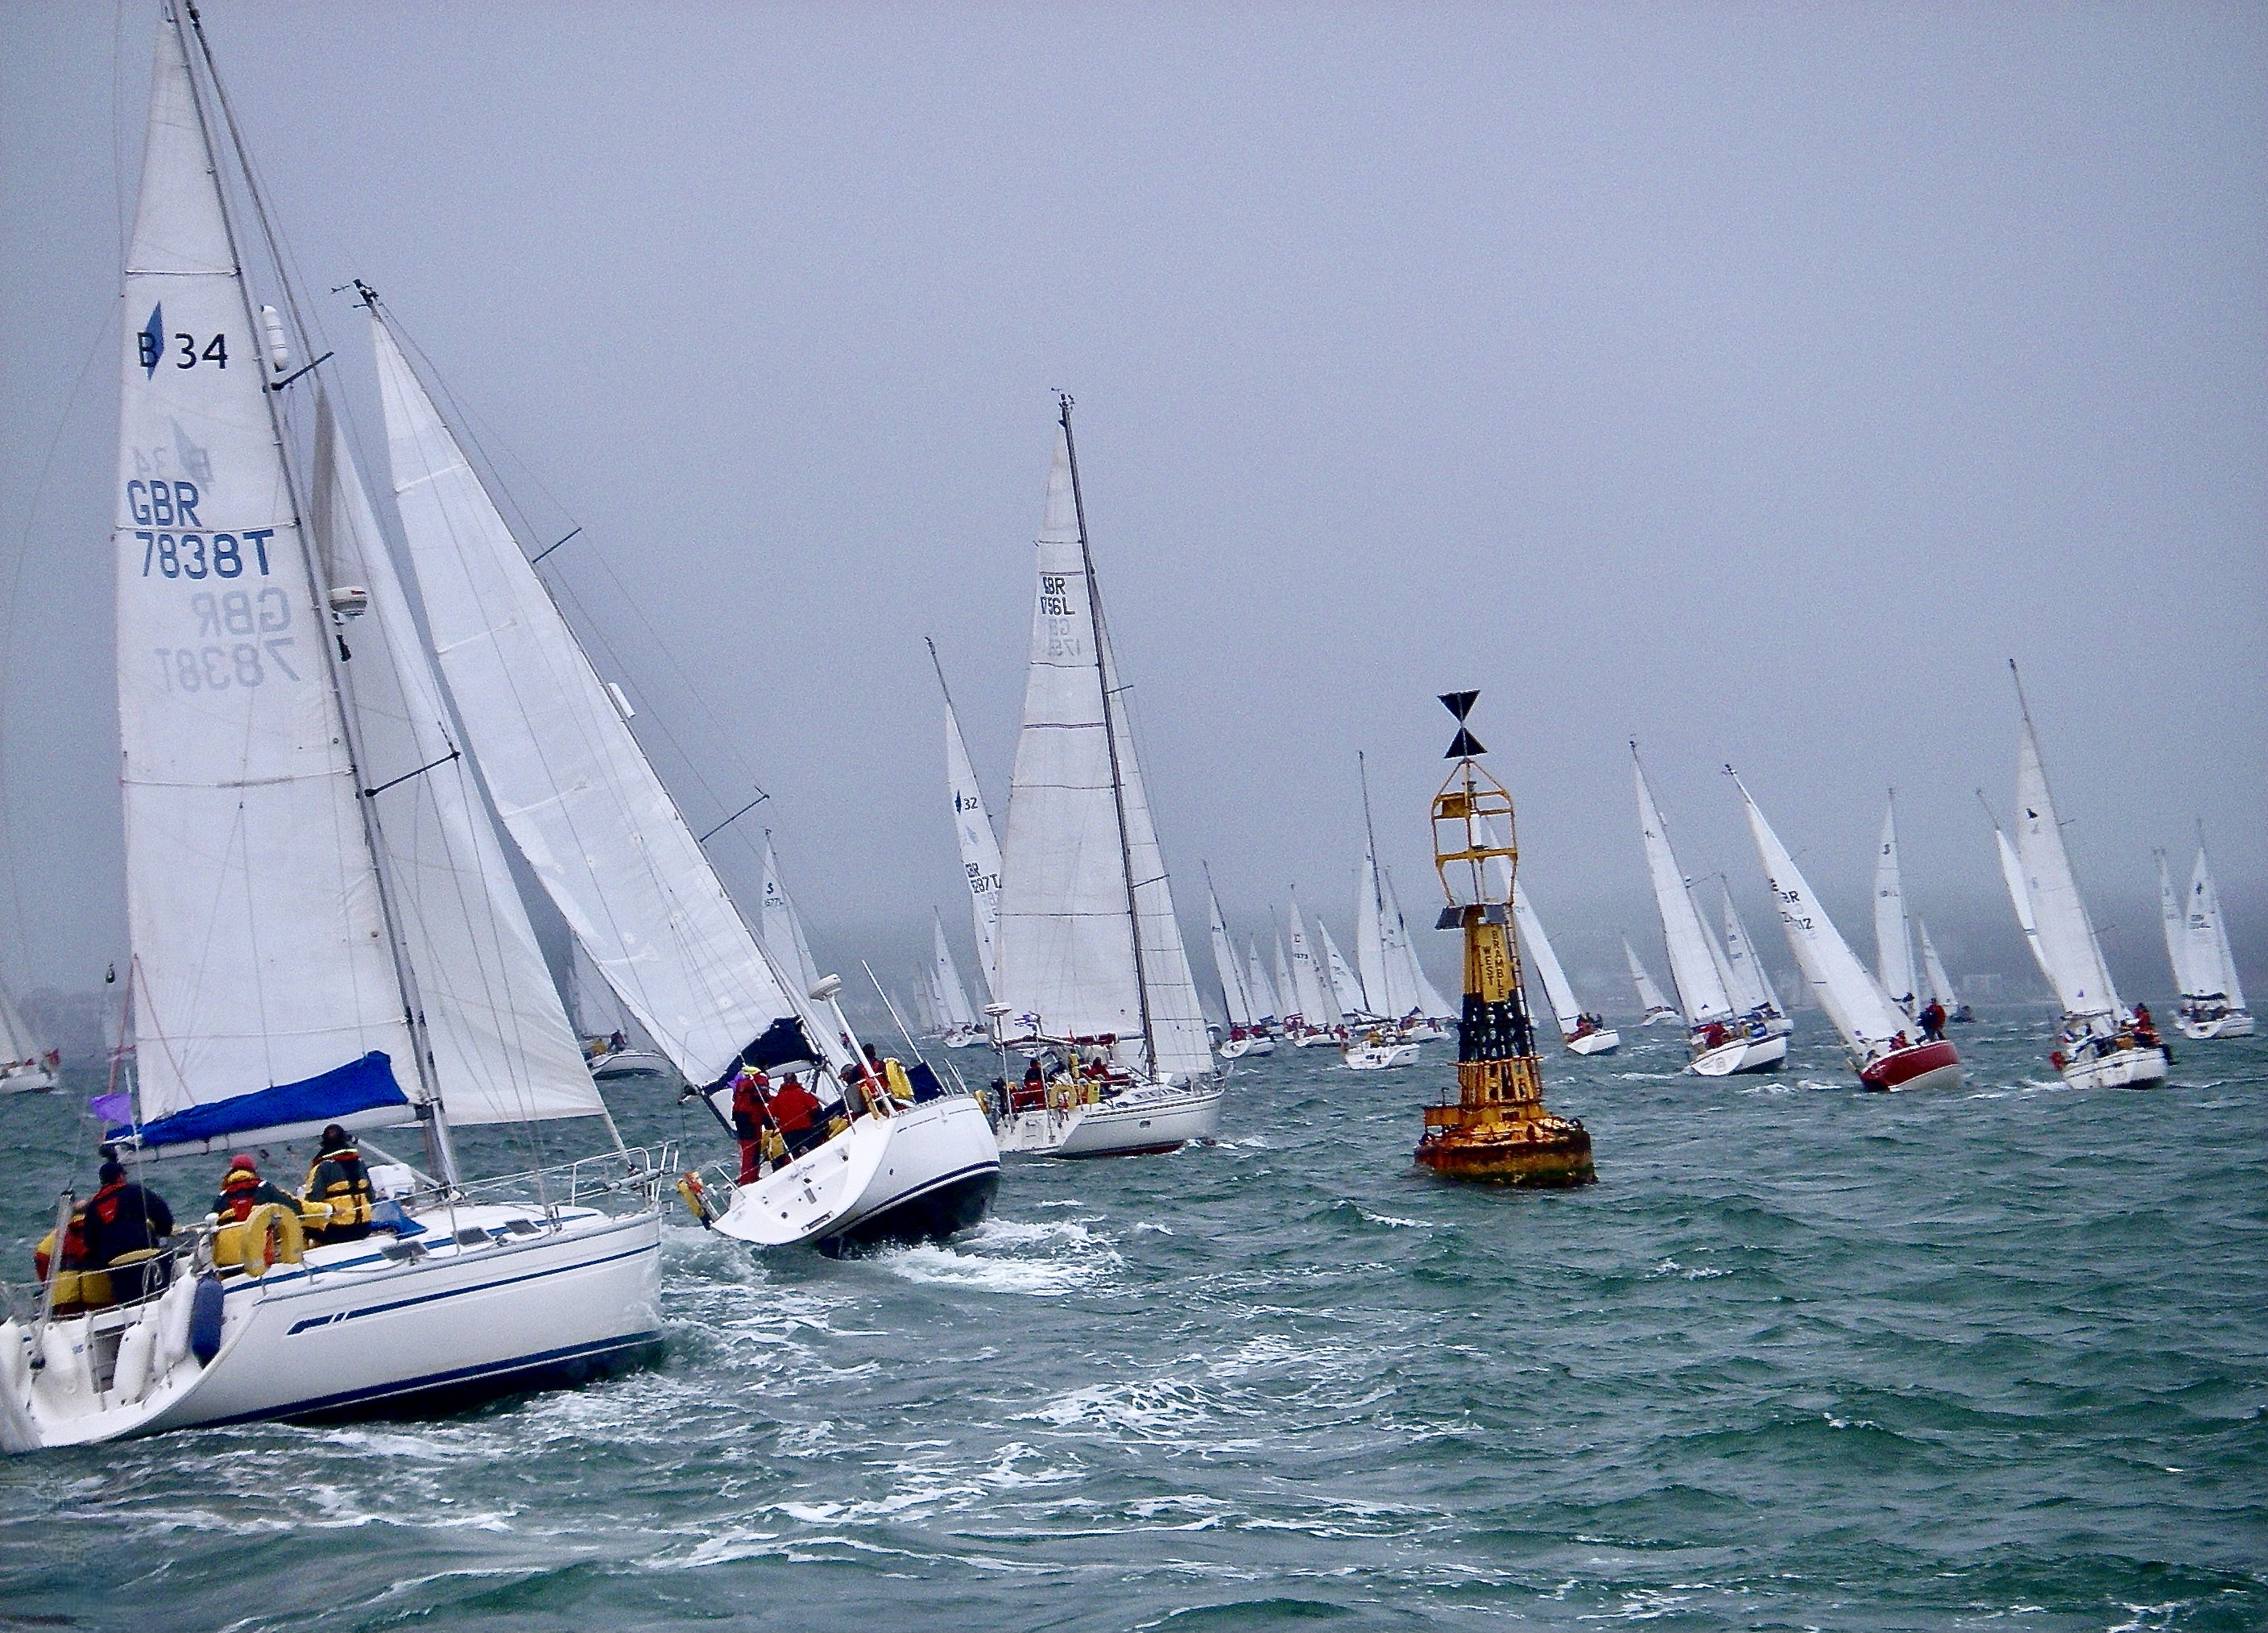 round-the-island-race-isle-of-wight-by-richard